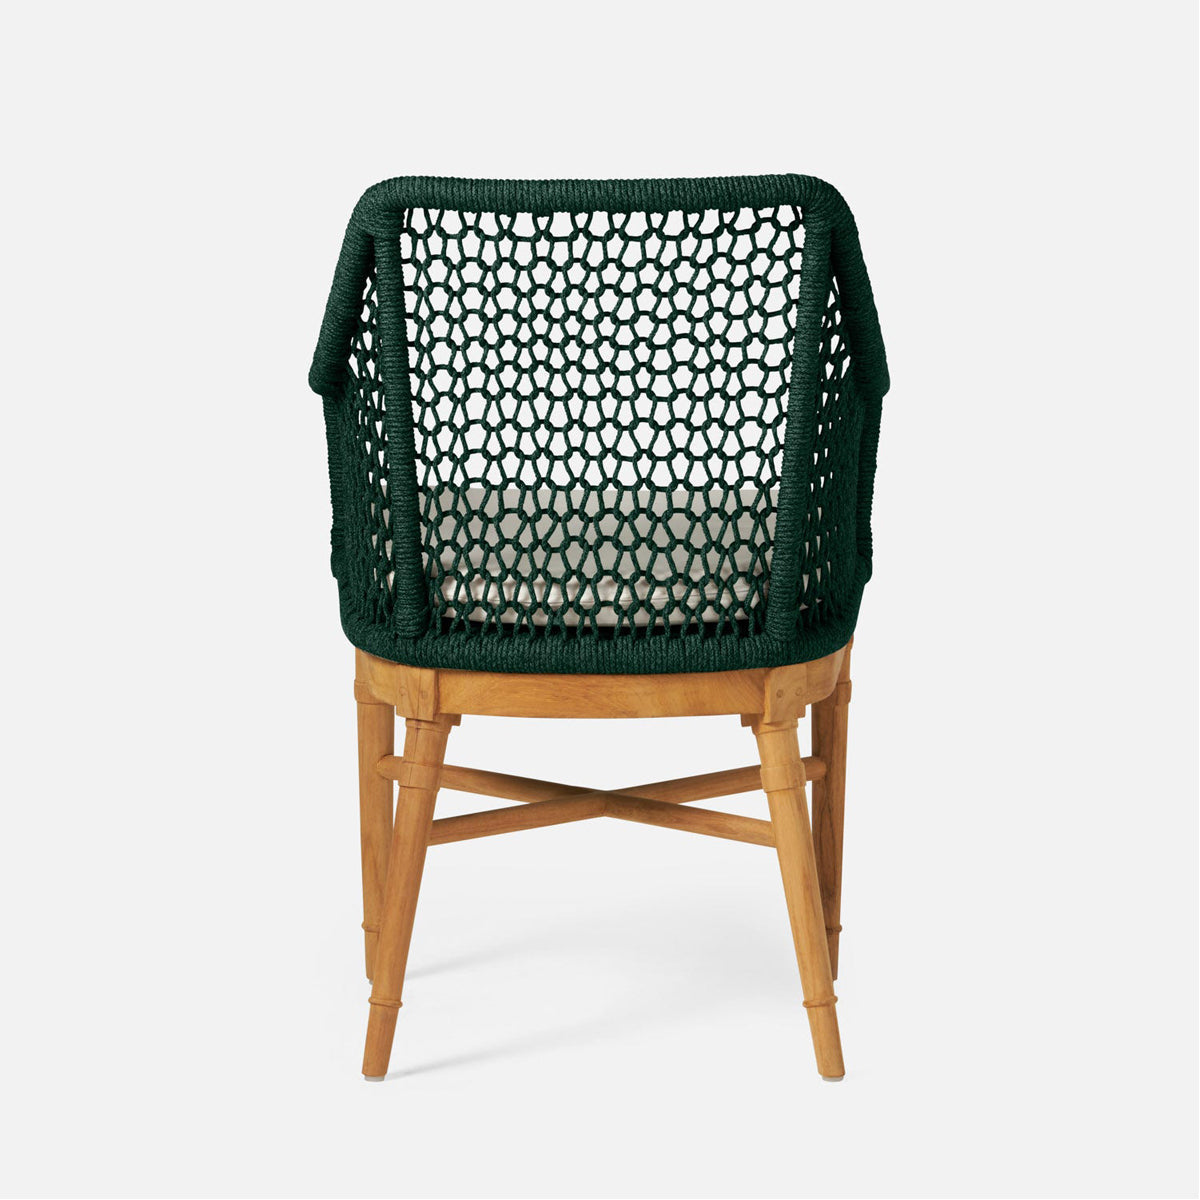 Made Goods Chadwick Woven Rope Outdoor Arm Chair in Volta Fabric